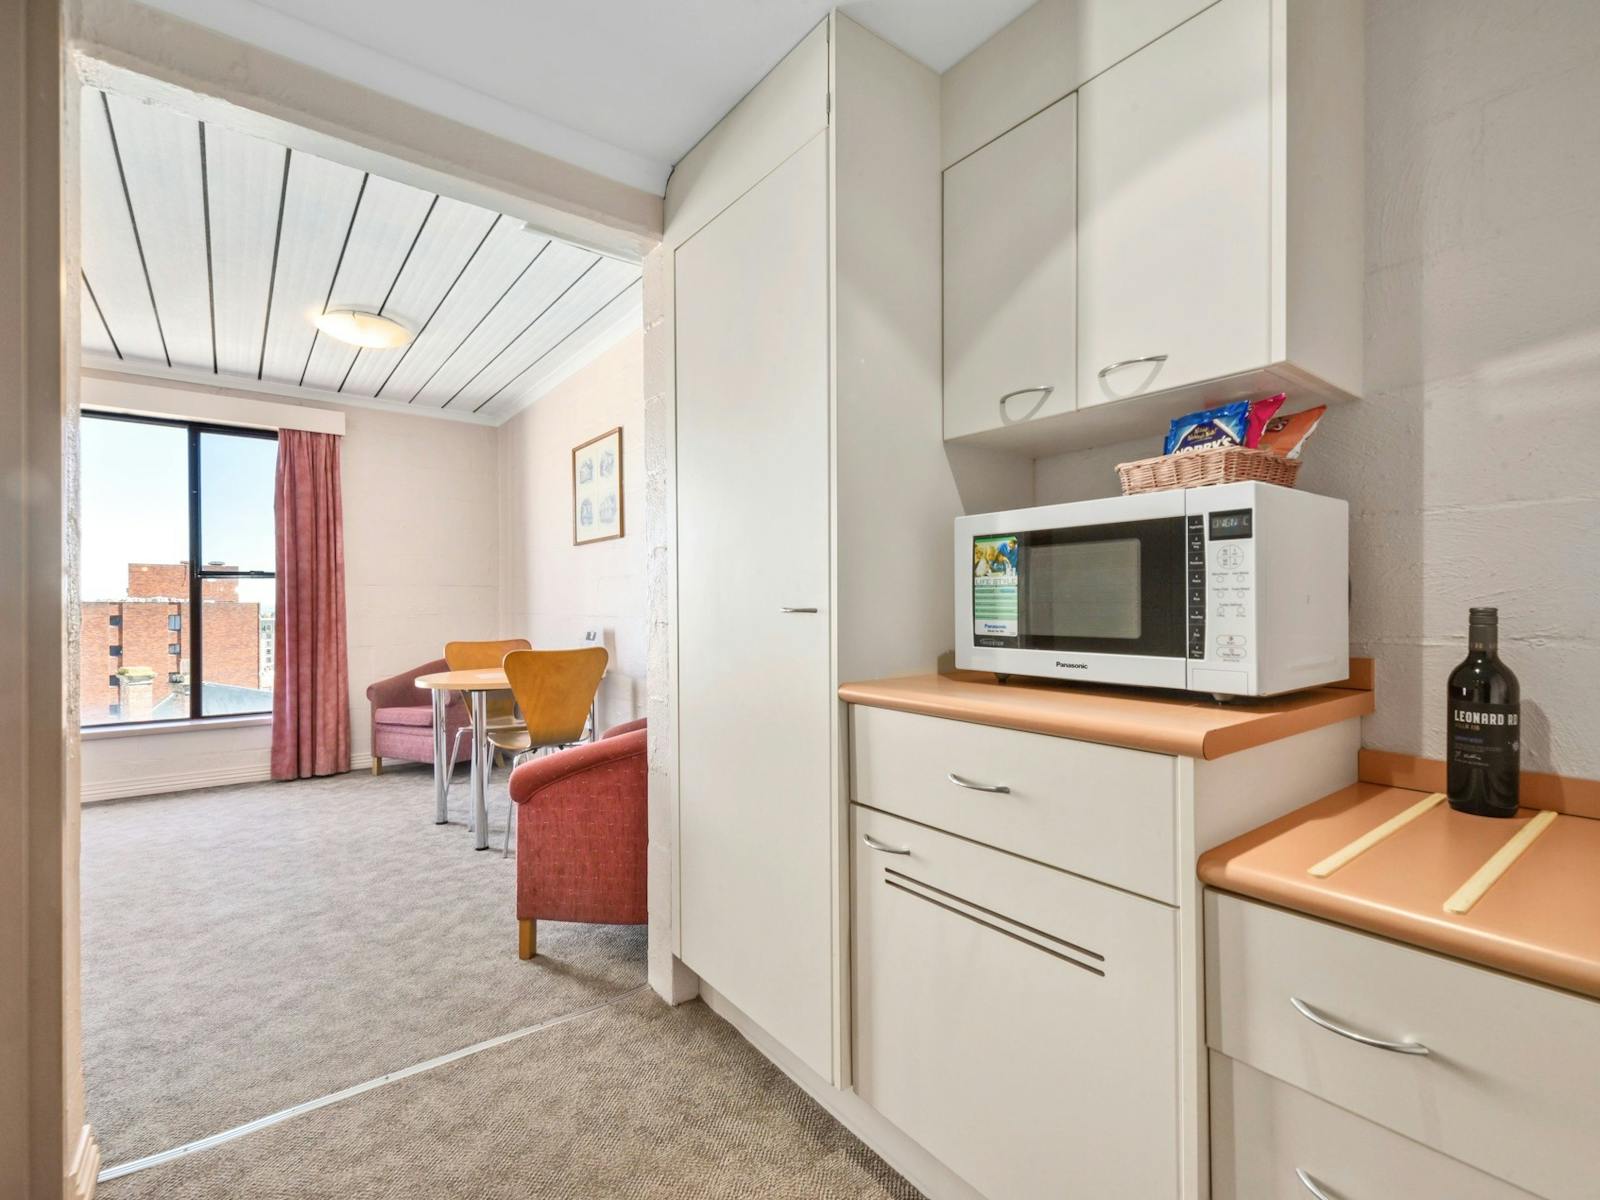 Larger corner rooms available with views across the CBD